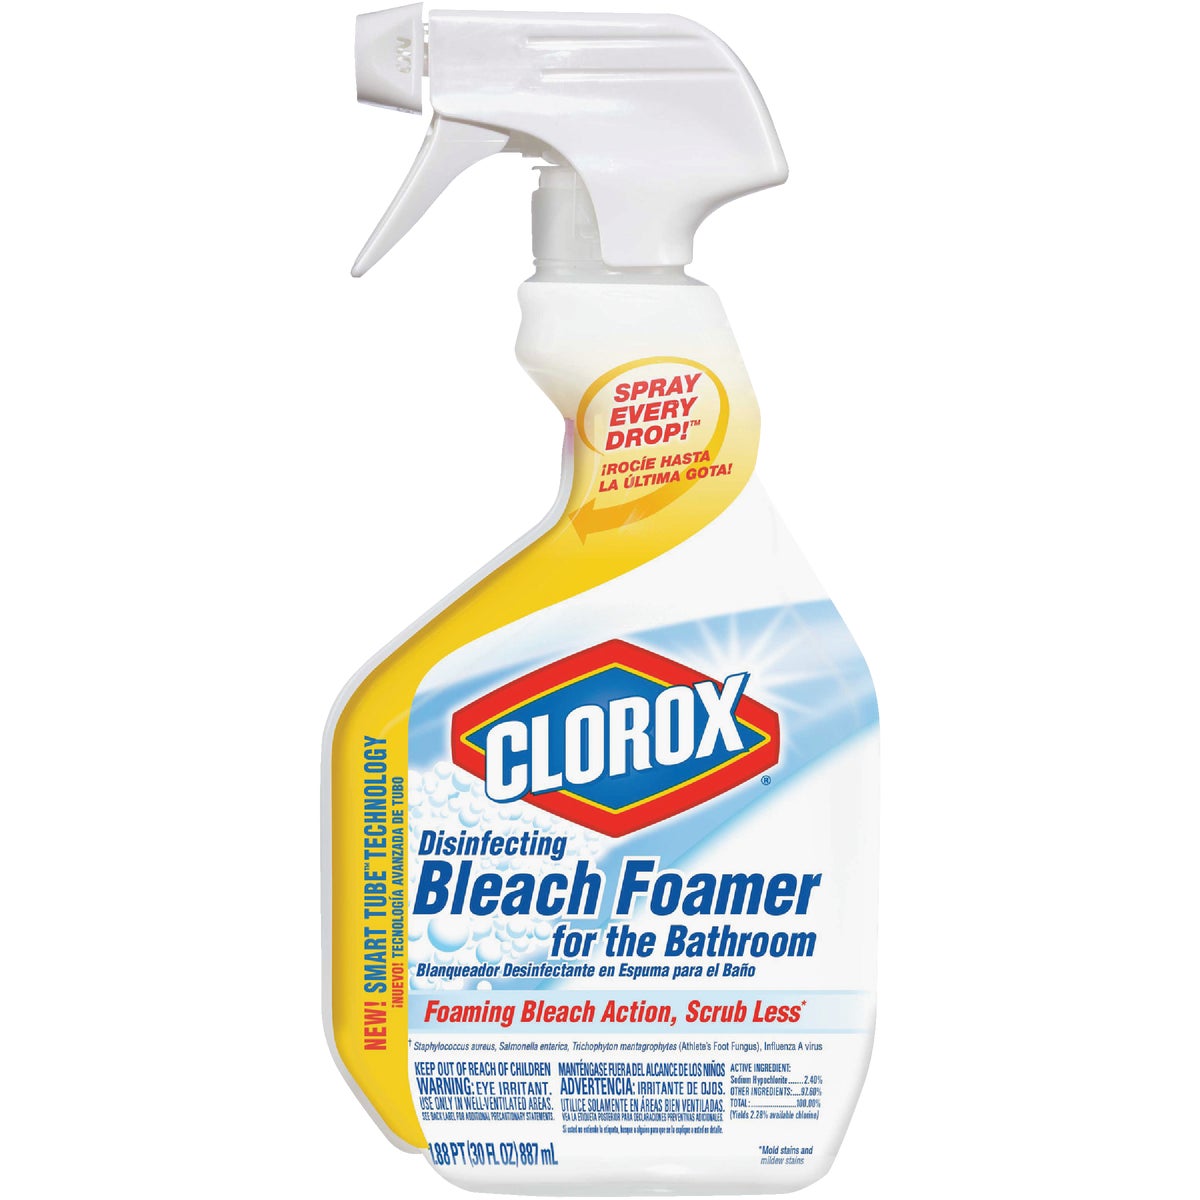 Item 621986, Formulated with a foaming action plus the power of Clorox bleach for less 